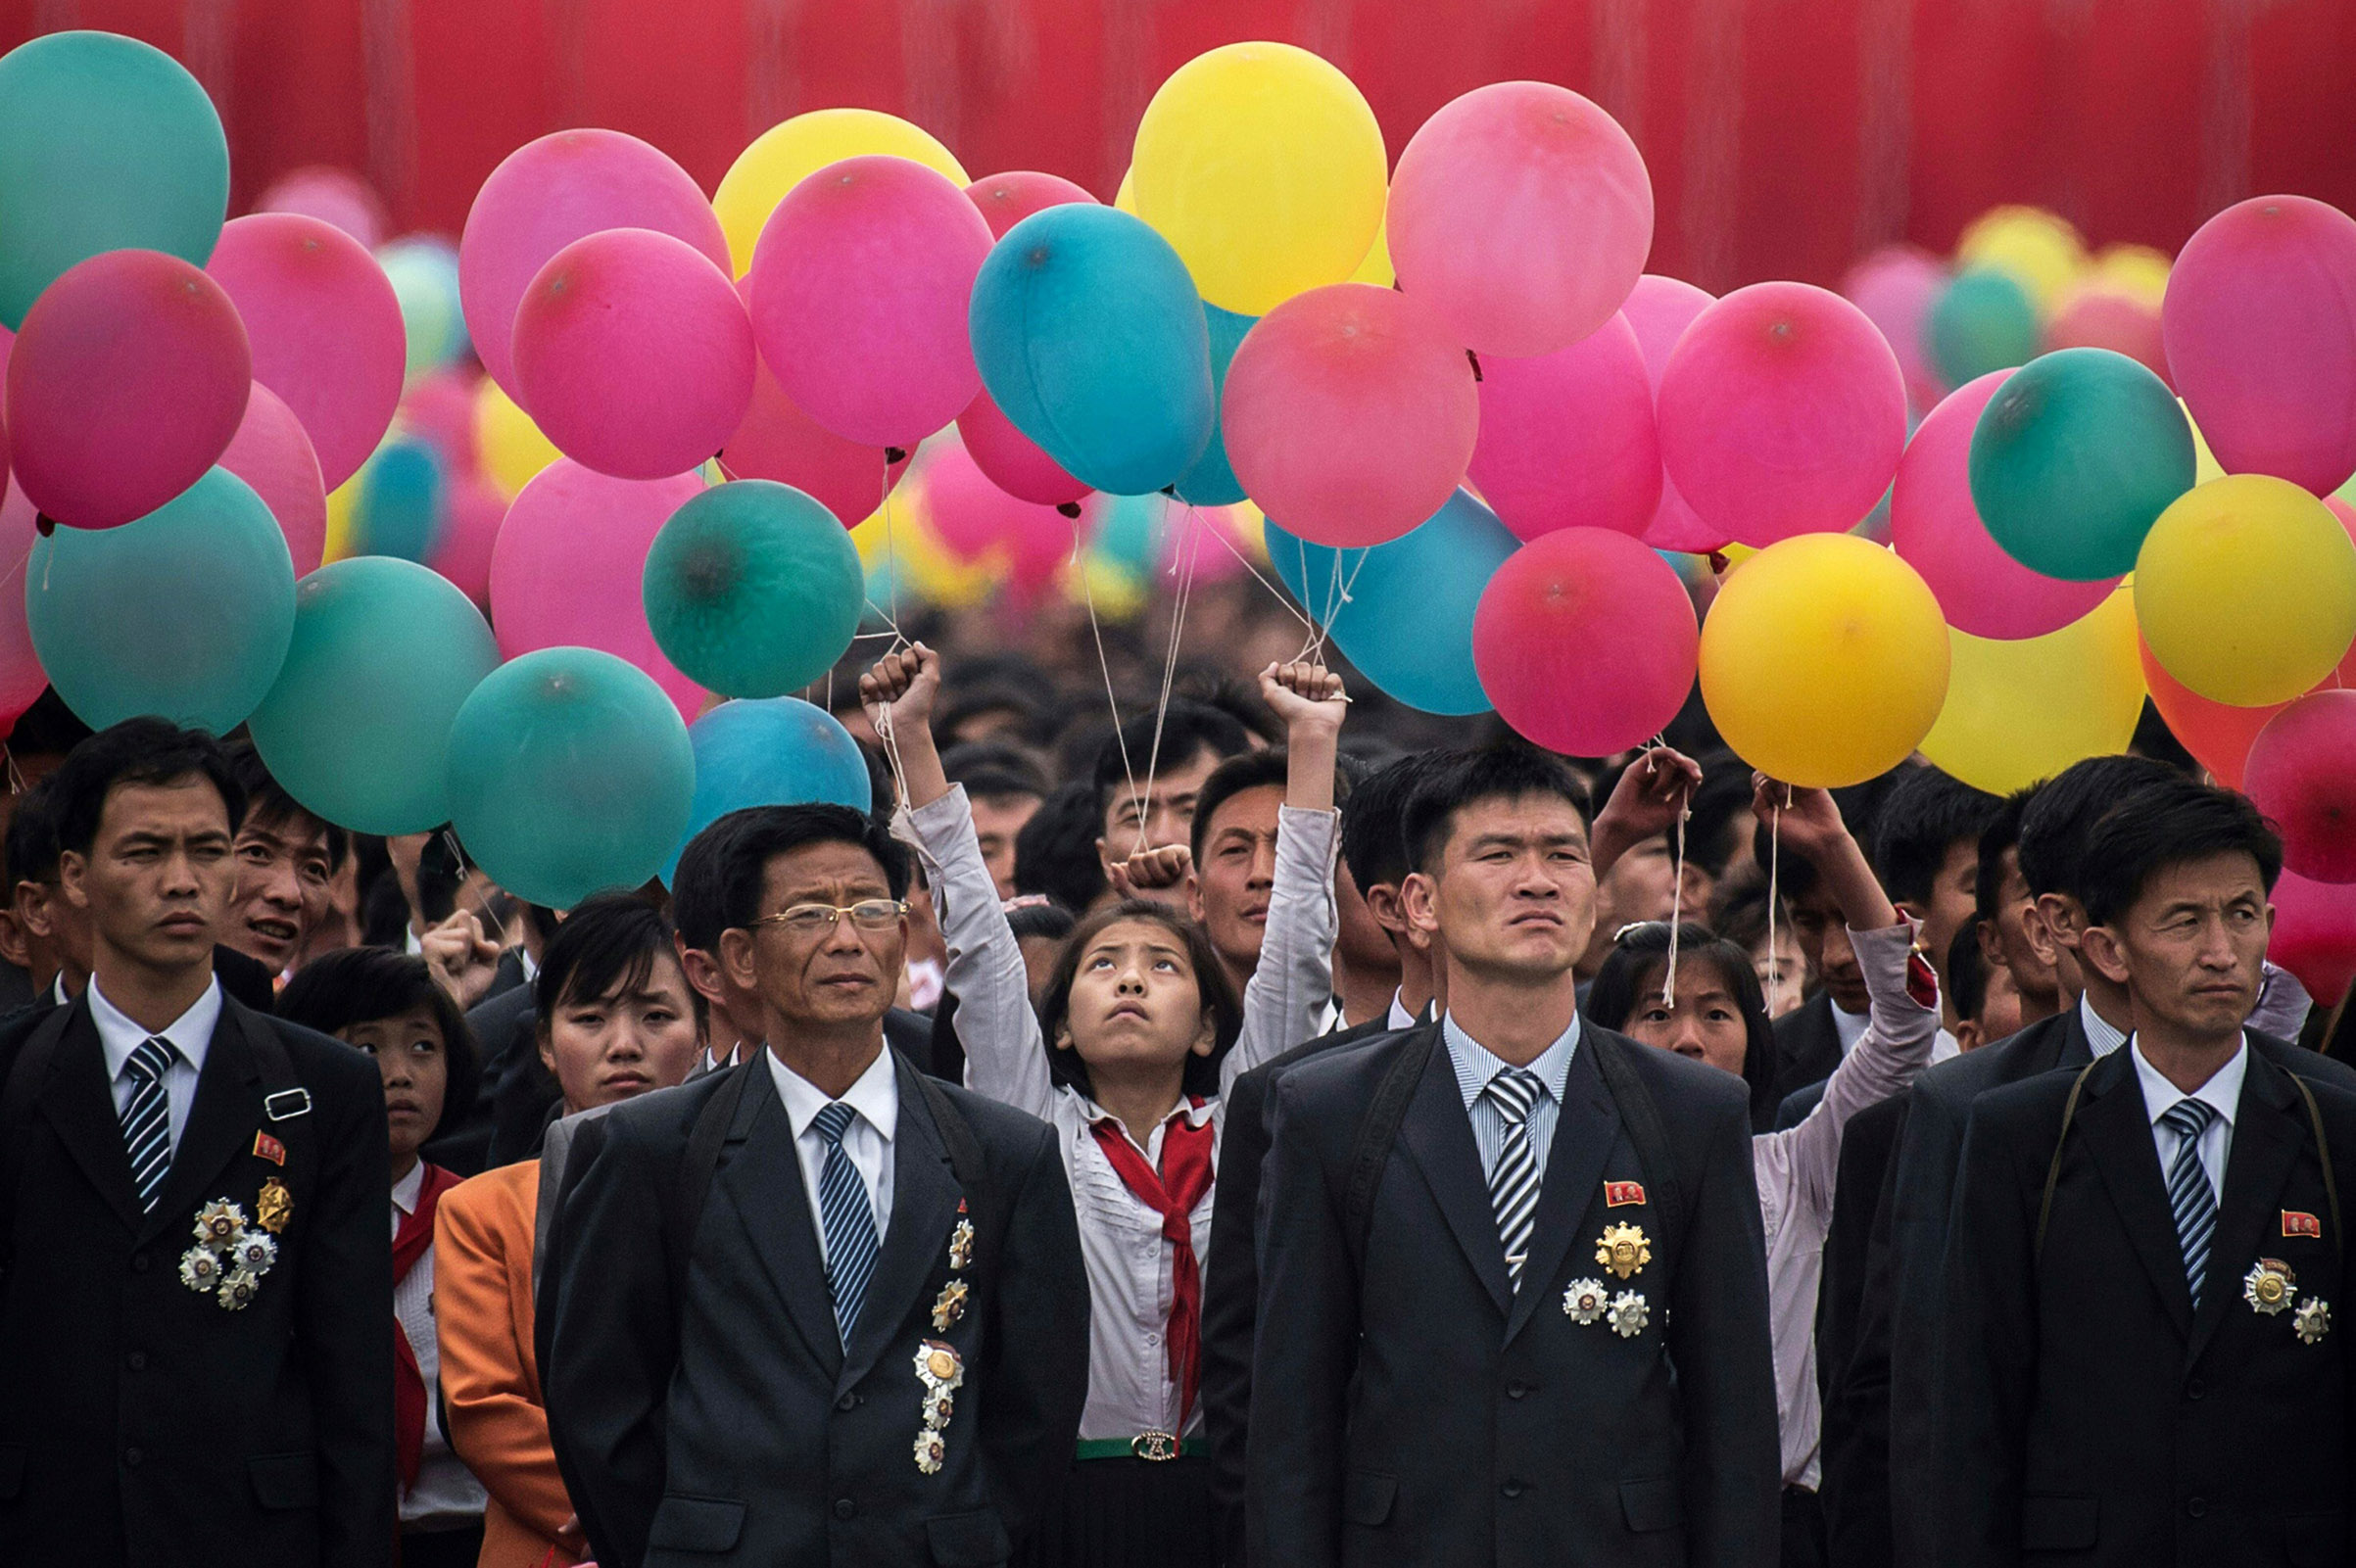 Participants wait to take part in a mass parade marking the end of the 7th Workers Party Congress in Kim Il Sung Square in Pyongyang on May 10, 2016. (Ed Jones—AFP/Getty Images)